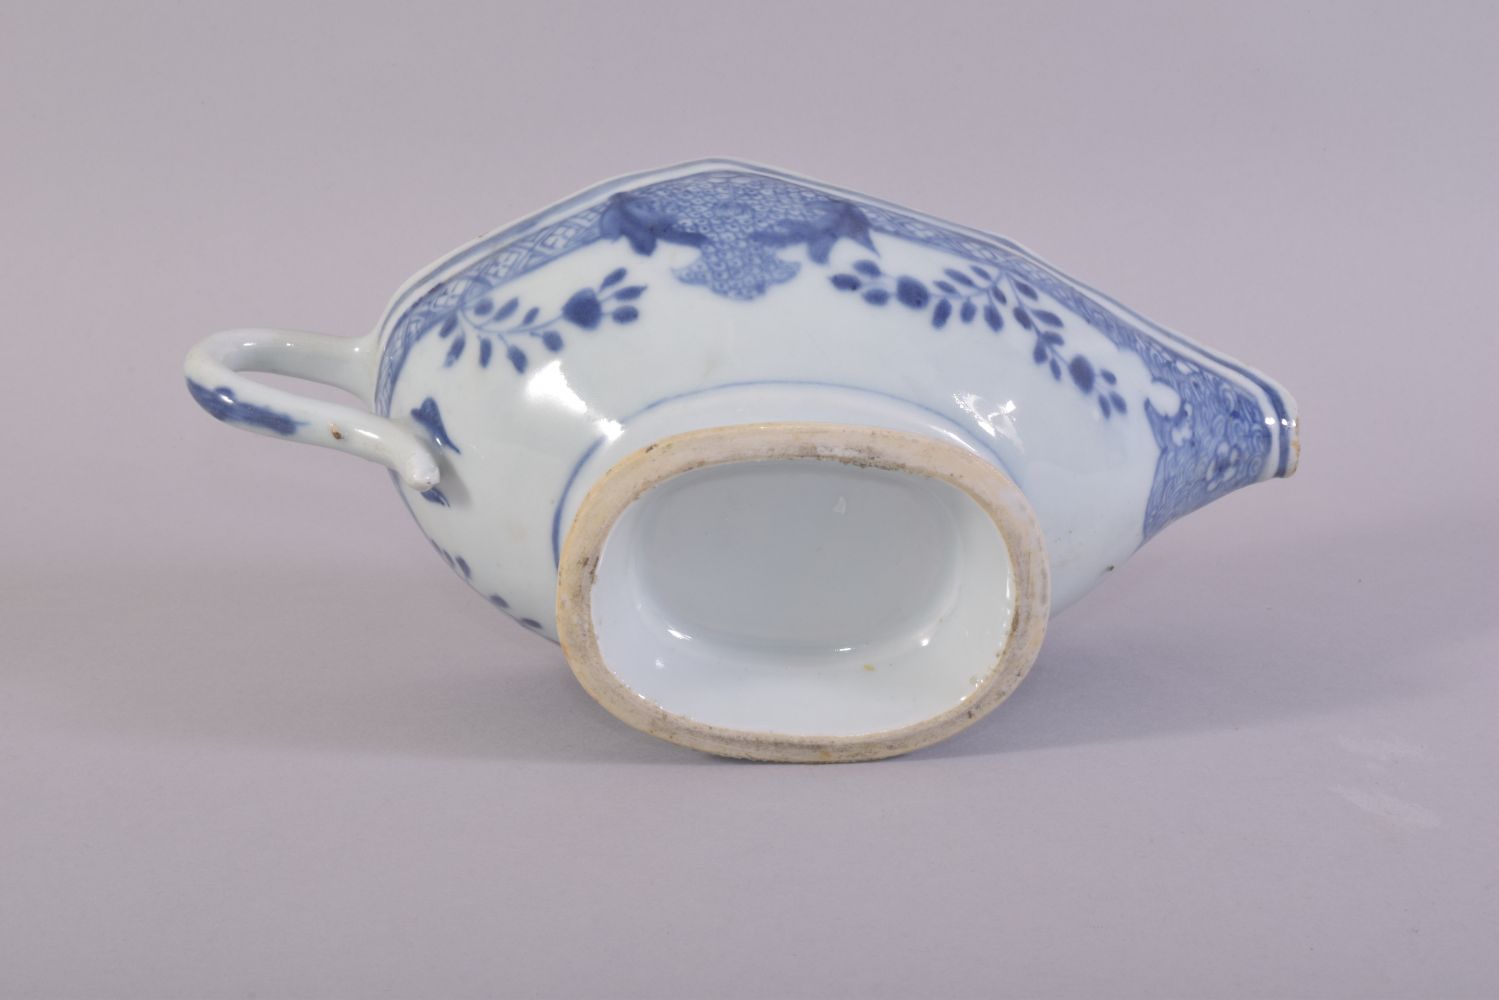 A CHINESE BLUE AND WHITE PORCELAIN SAUCE BOAT, the interior decorated with native flora, 21.5cm - Image 6 of 6